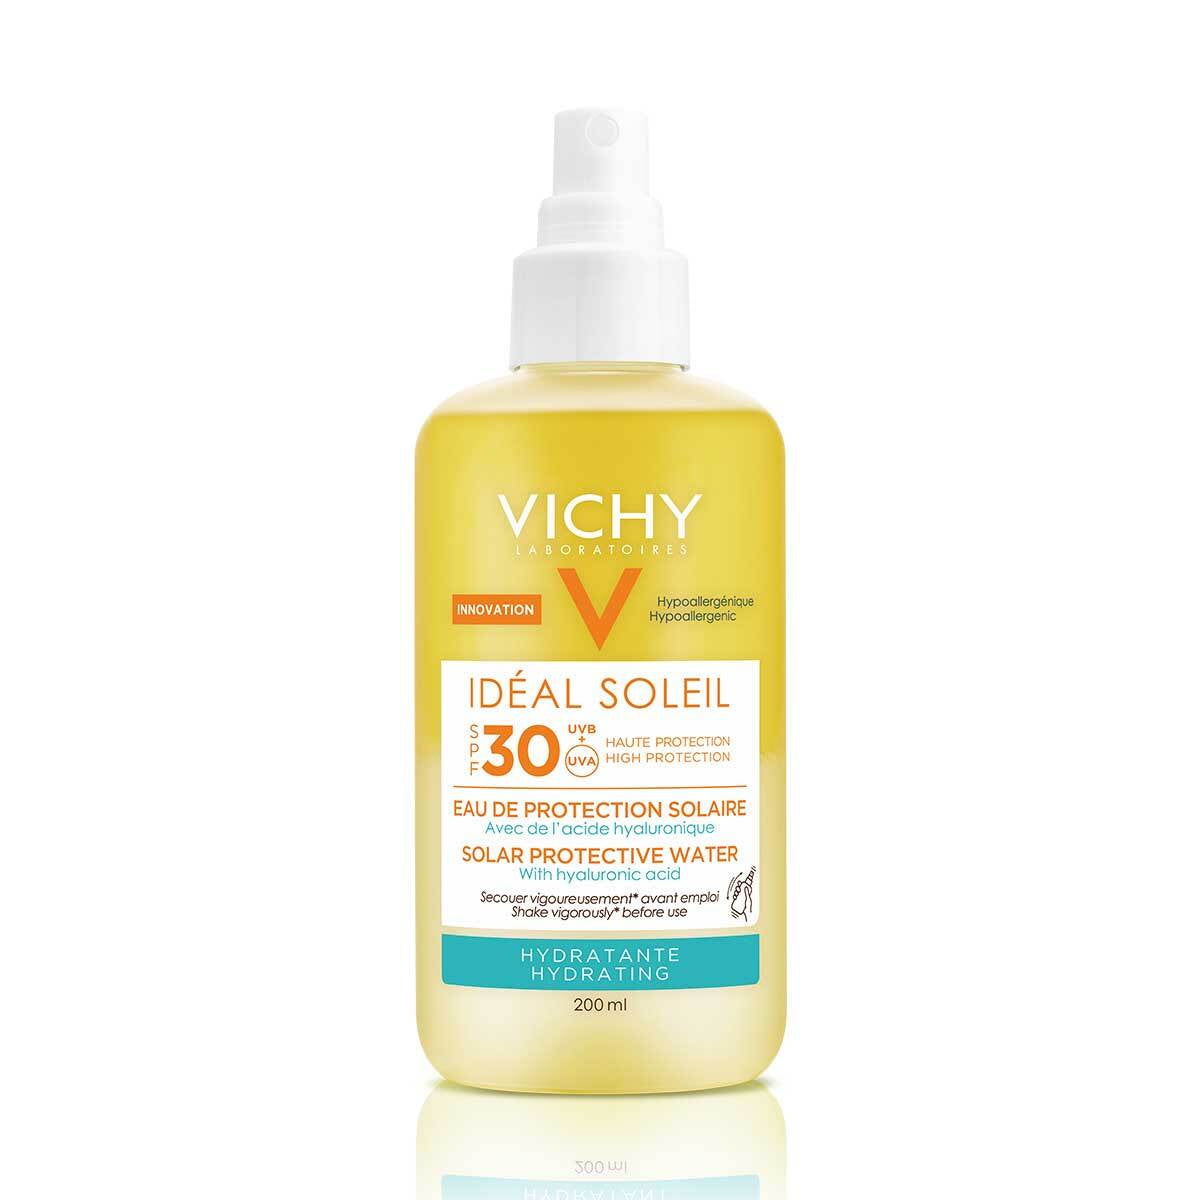 Vichy Idéal Soleil Hydrating Protective Water SPF 30